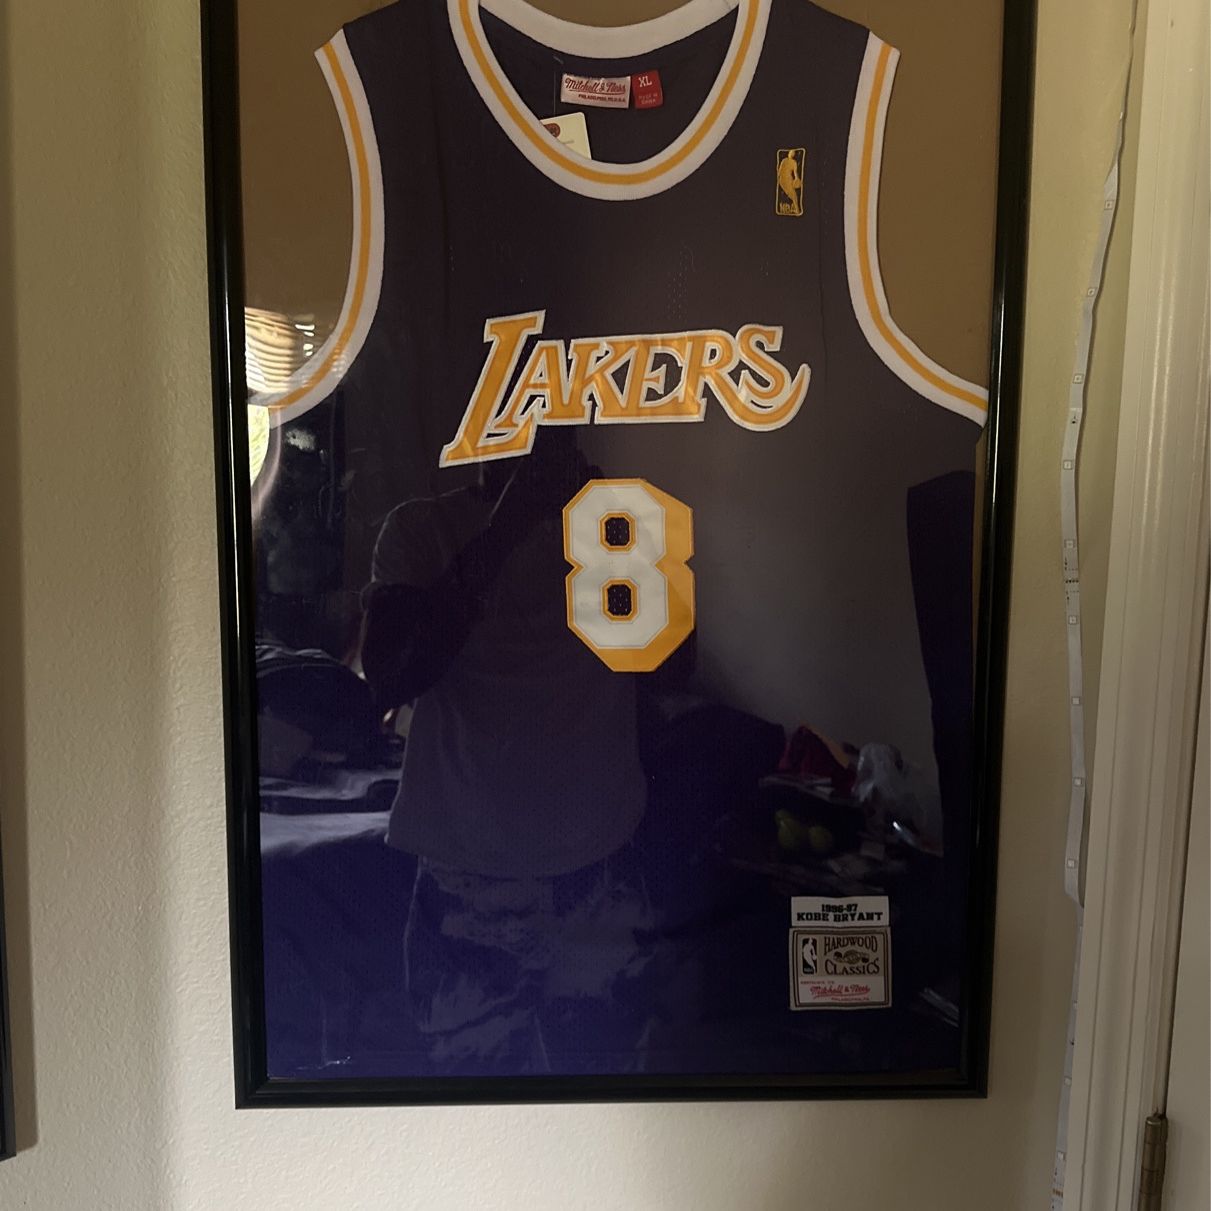 KOBE BRYANT LAKERS AWAY JERSEY SIZE L THROWBACK for Sale in Celebration, FL  - OfferUp